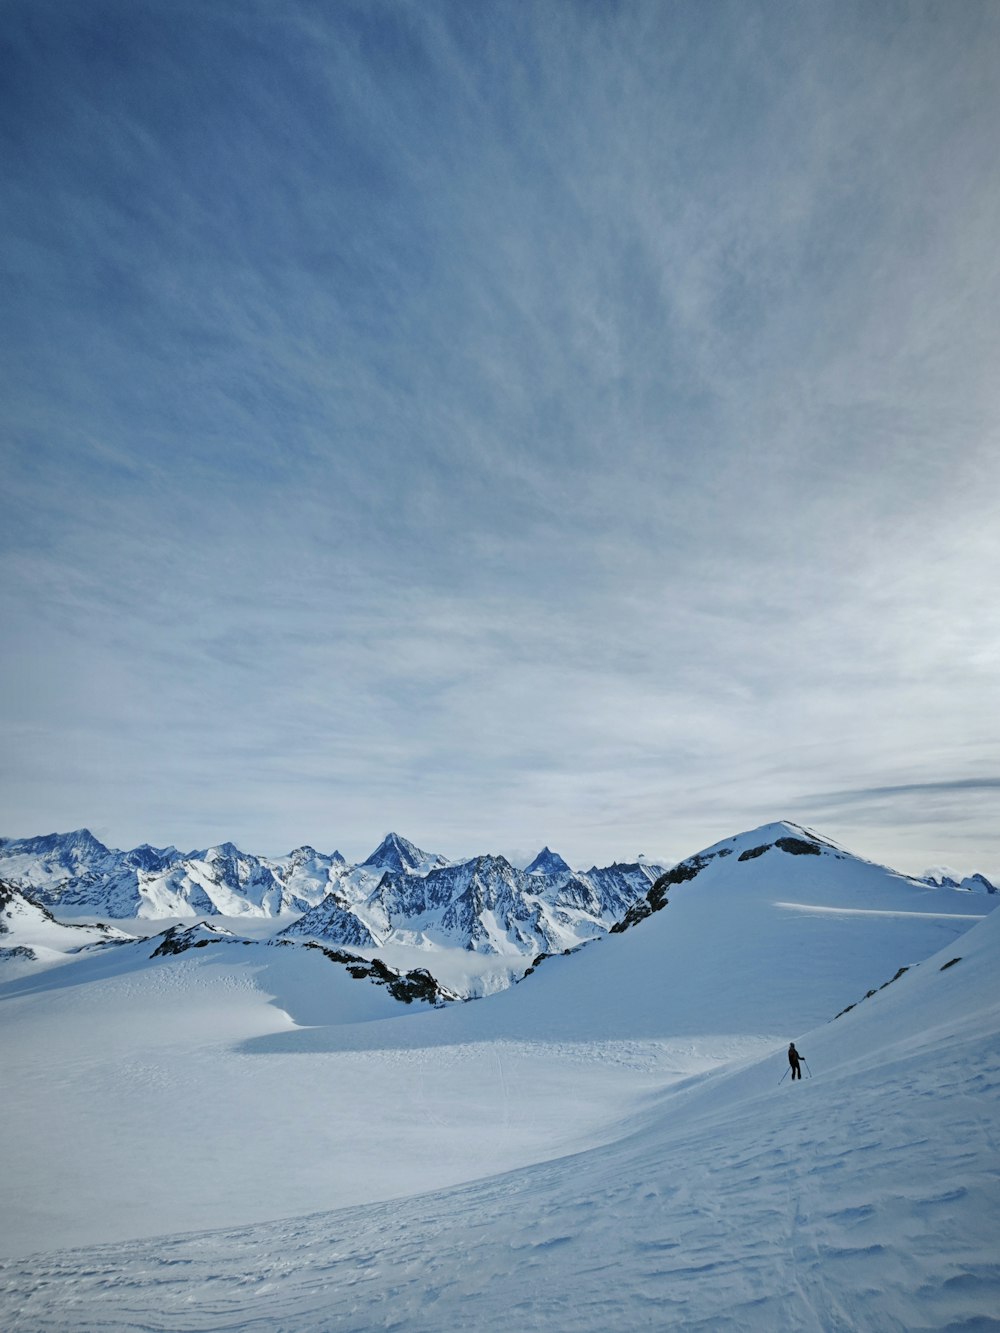 a person on skis in the snow with mountains in the background